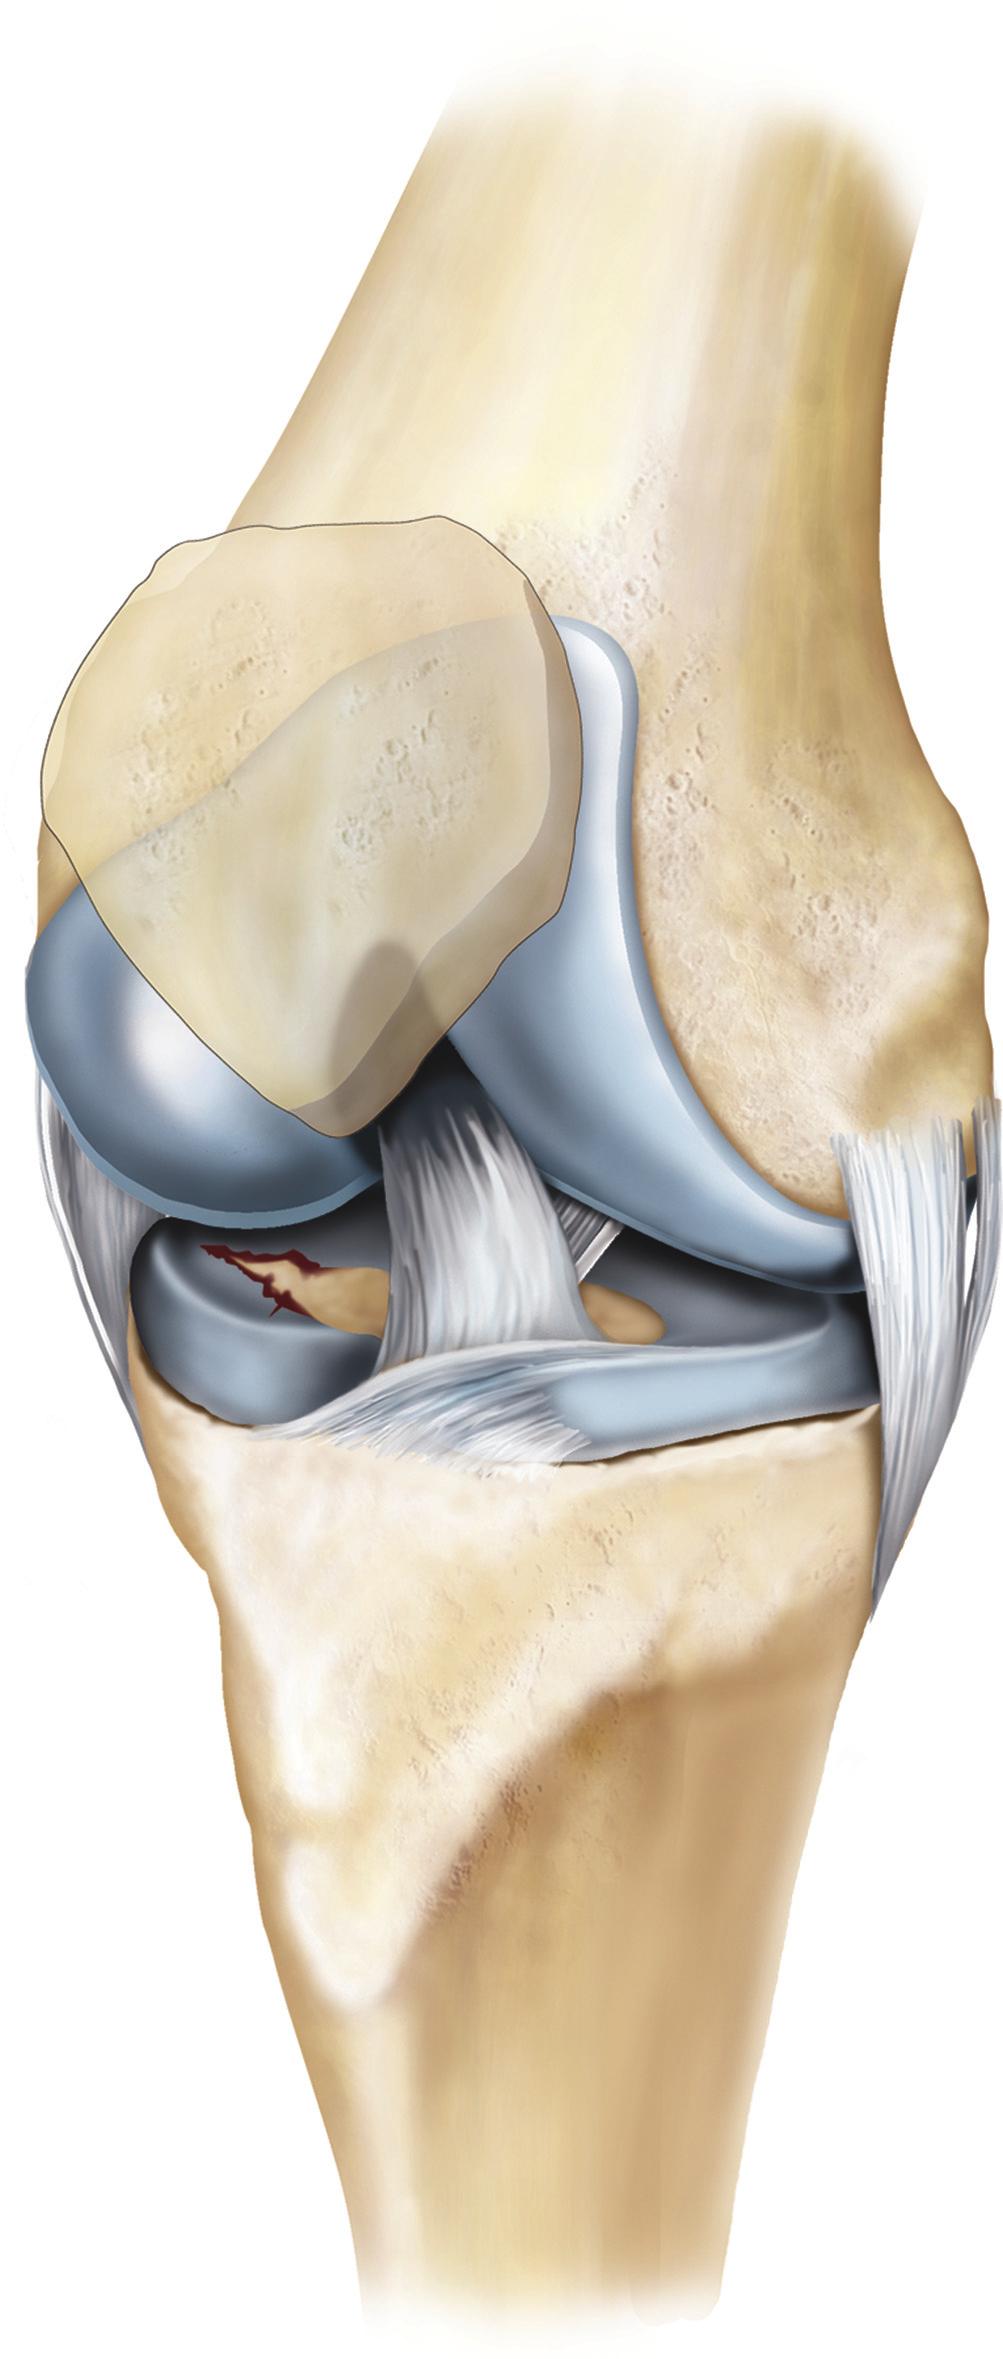 What is an arthroscopy of your knee? An arthroscopy (keyhole surgery) allows your surgeon to see inside your knee using a camera inserted through small cuts in your skin.